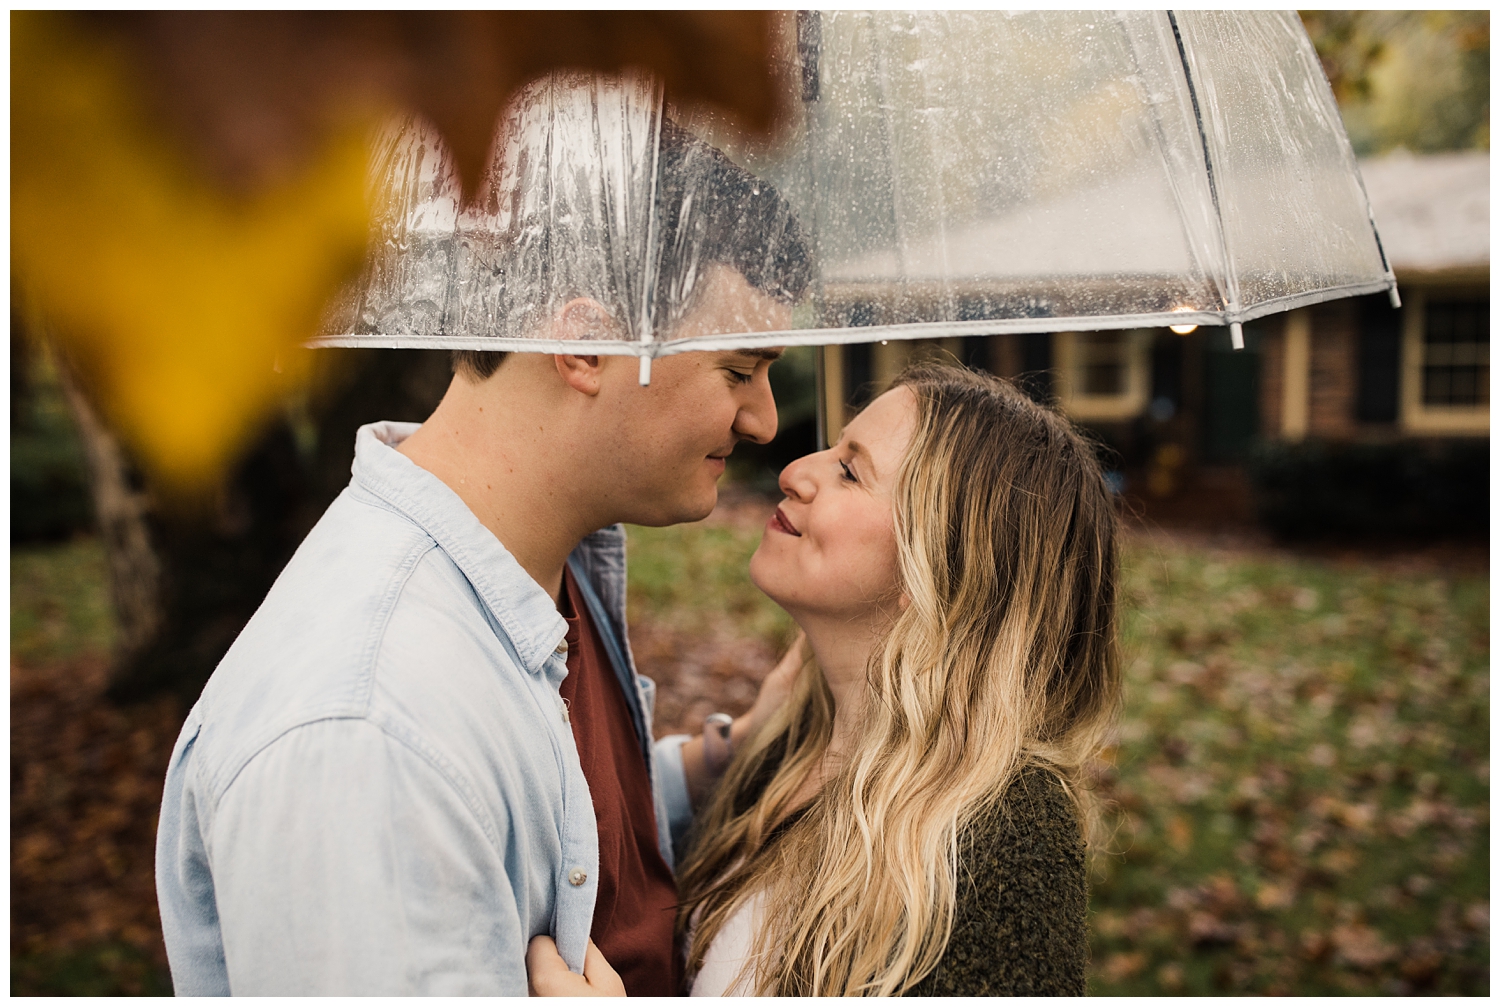 Rainy Day Engagement Session in Marietta, Georgia with cute couple standing under a clear umbrella in their front yard